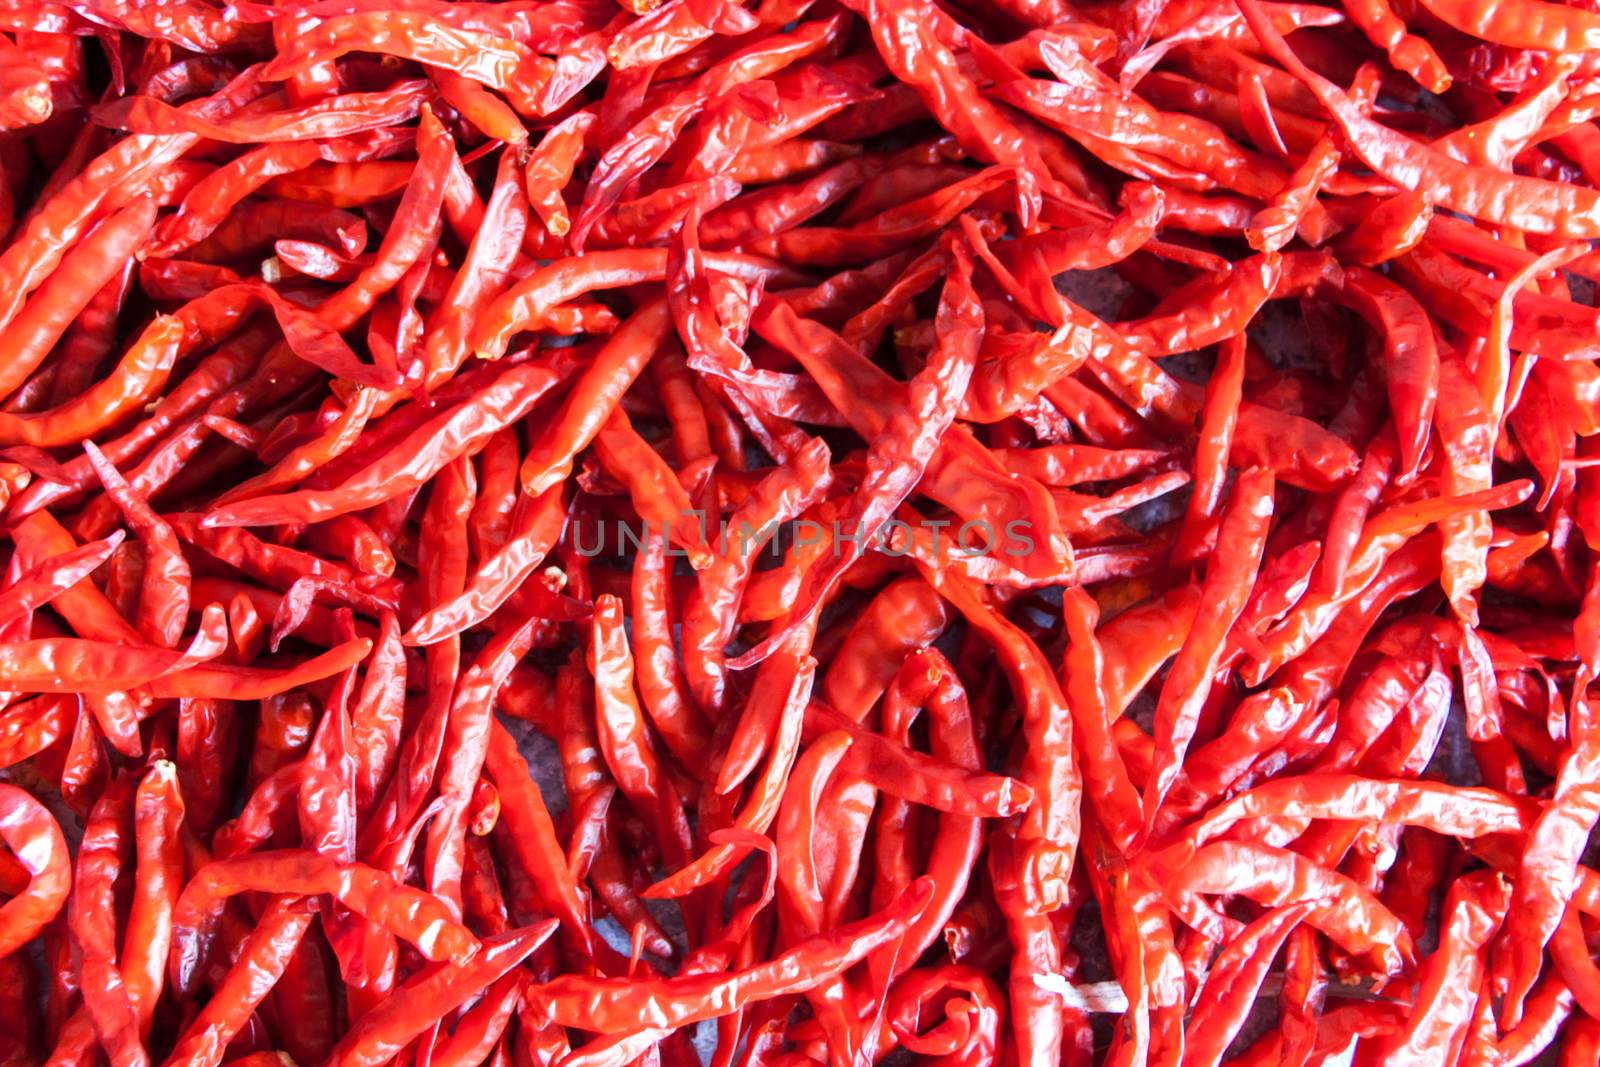 Dried red chili pepper by PeachLoveU